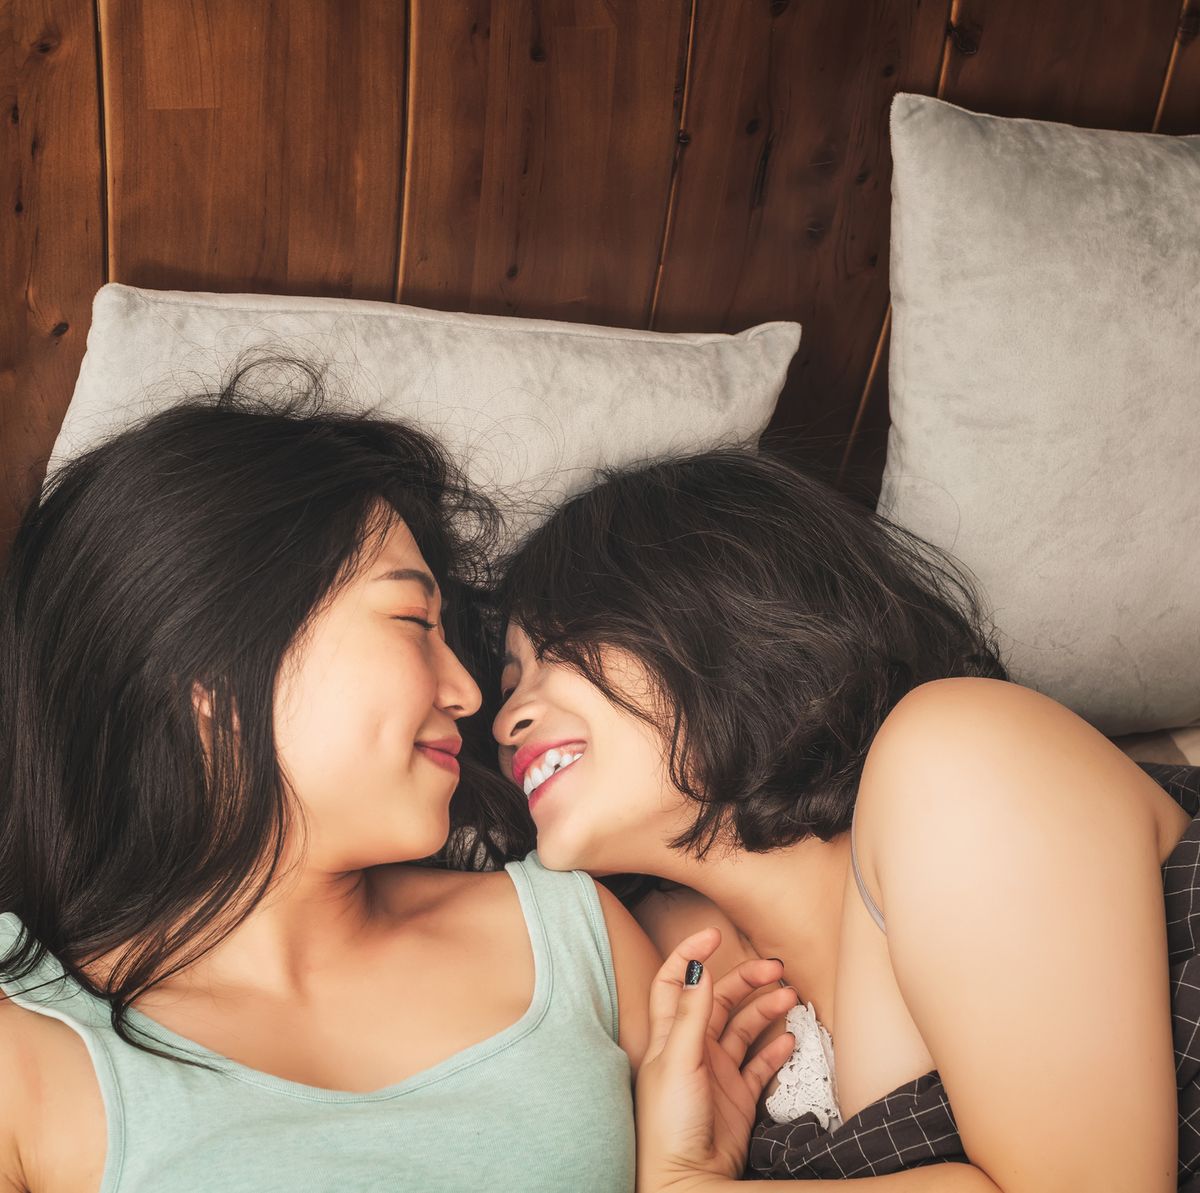 3 Girl Forces One Boy Sex - Am I A Lesbian?' - 15 People Share How They Knew Their Sexuality